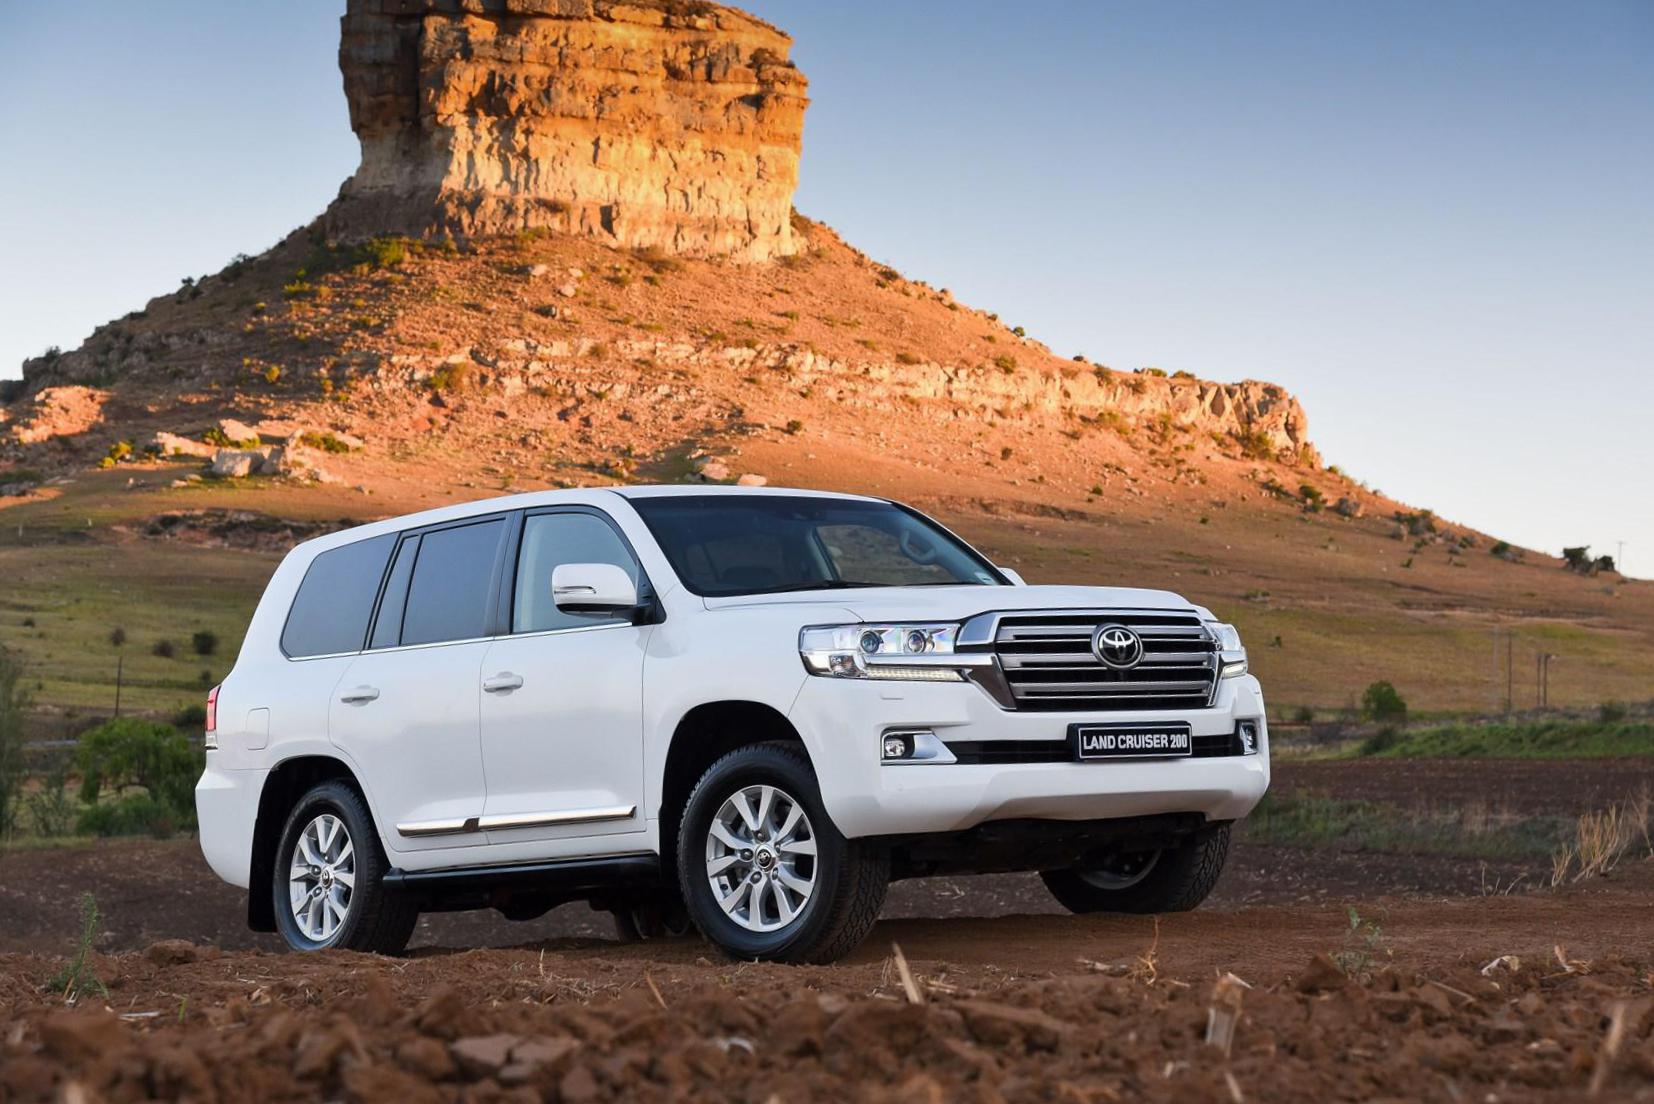 Toyota Land Cruiser 200 approved suv